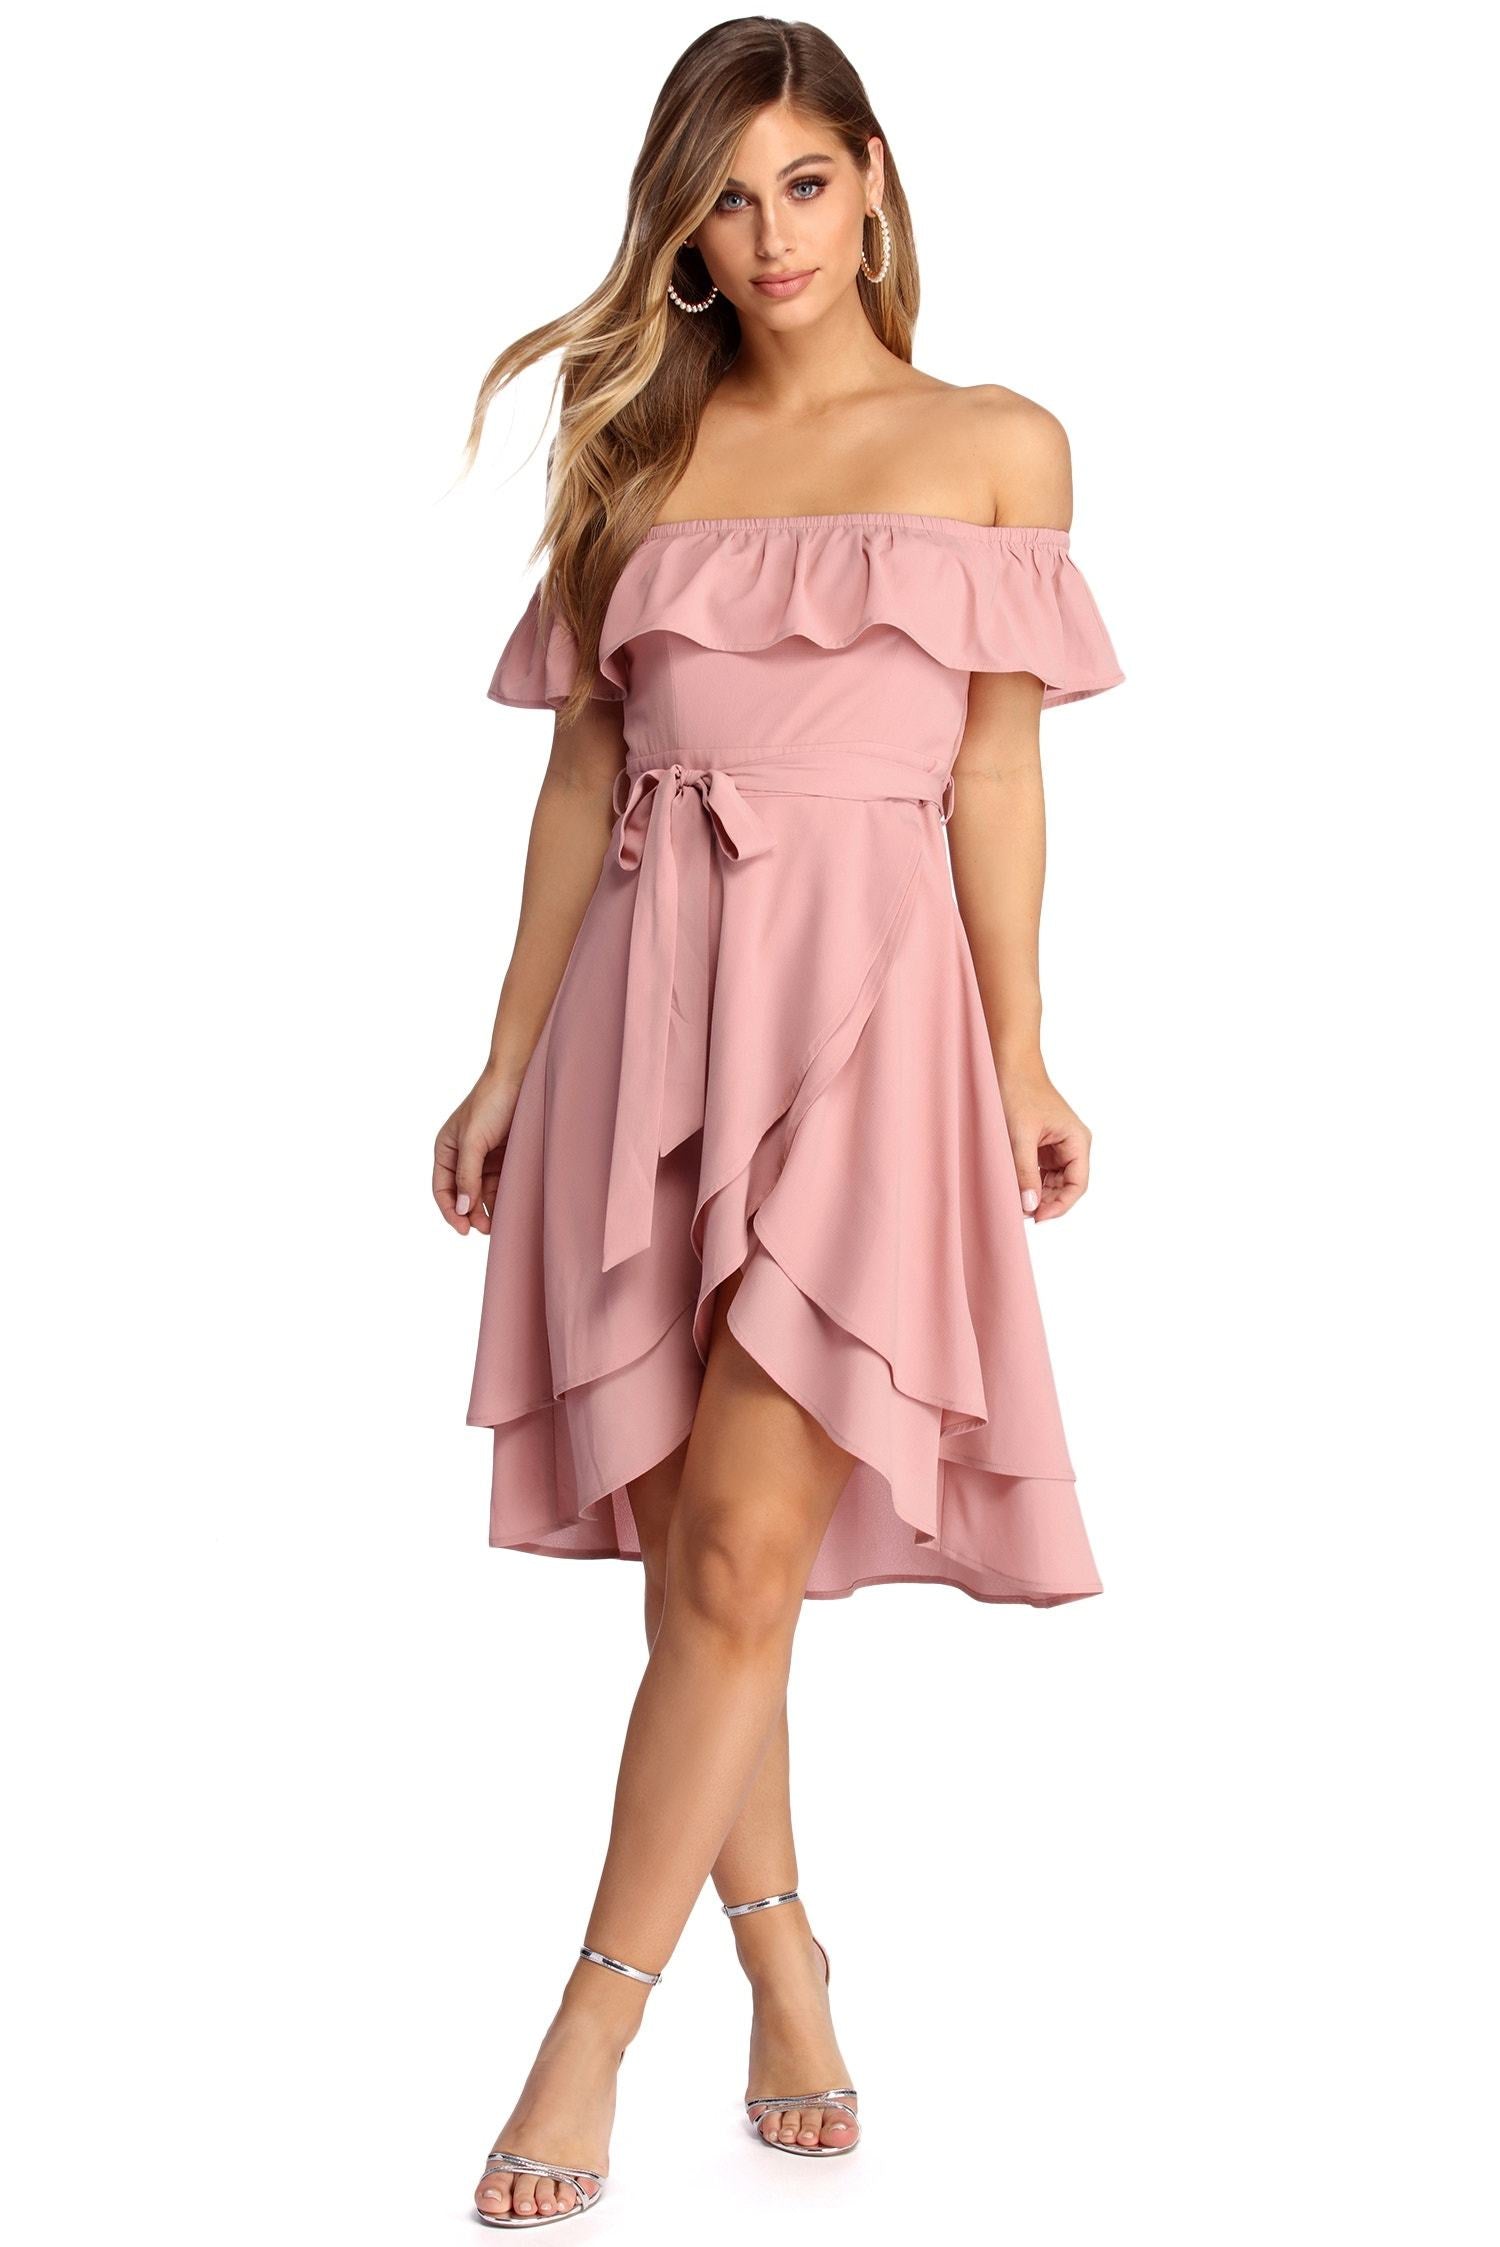 Chasing Dreams Ruffle Dress - Lady Occasions